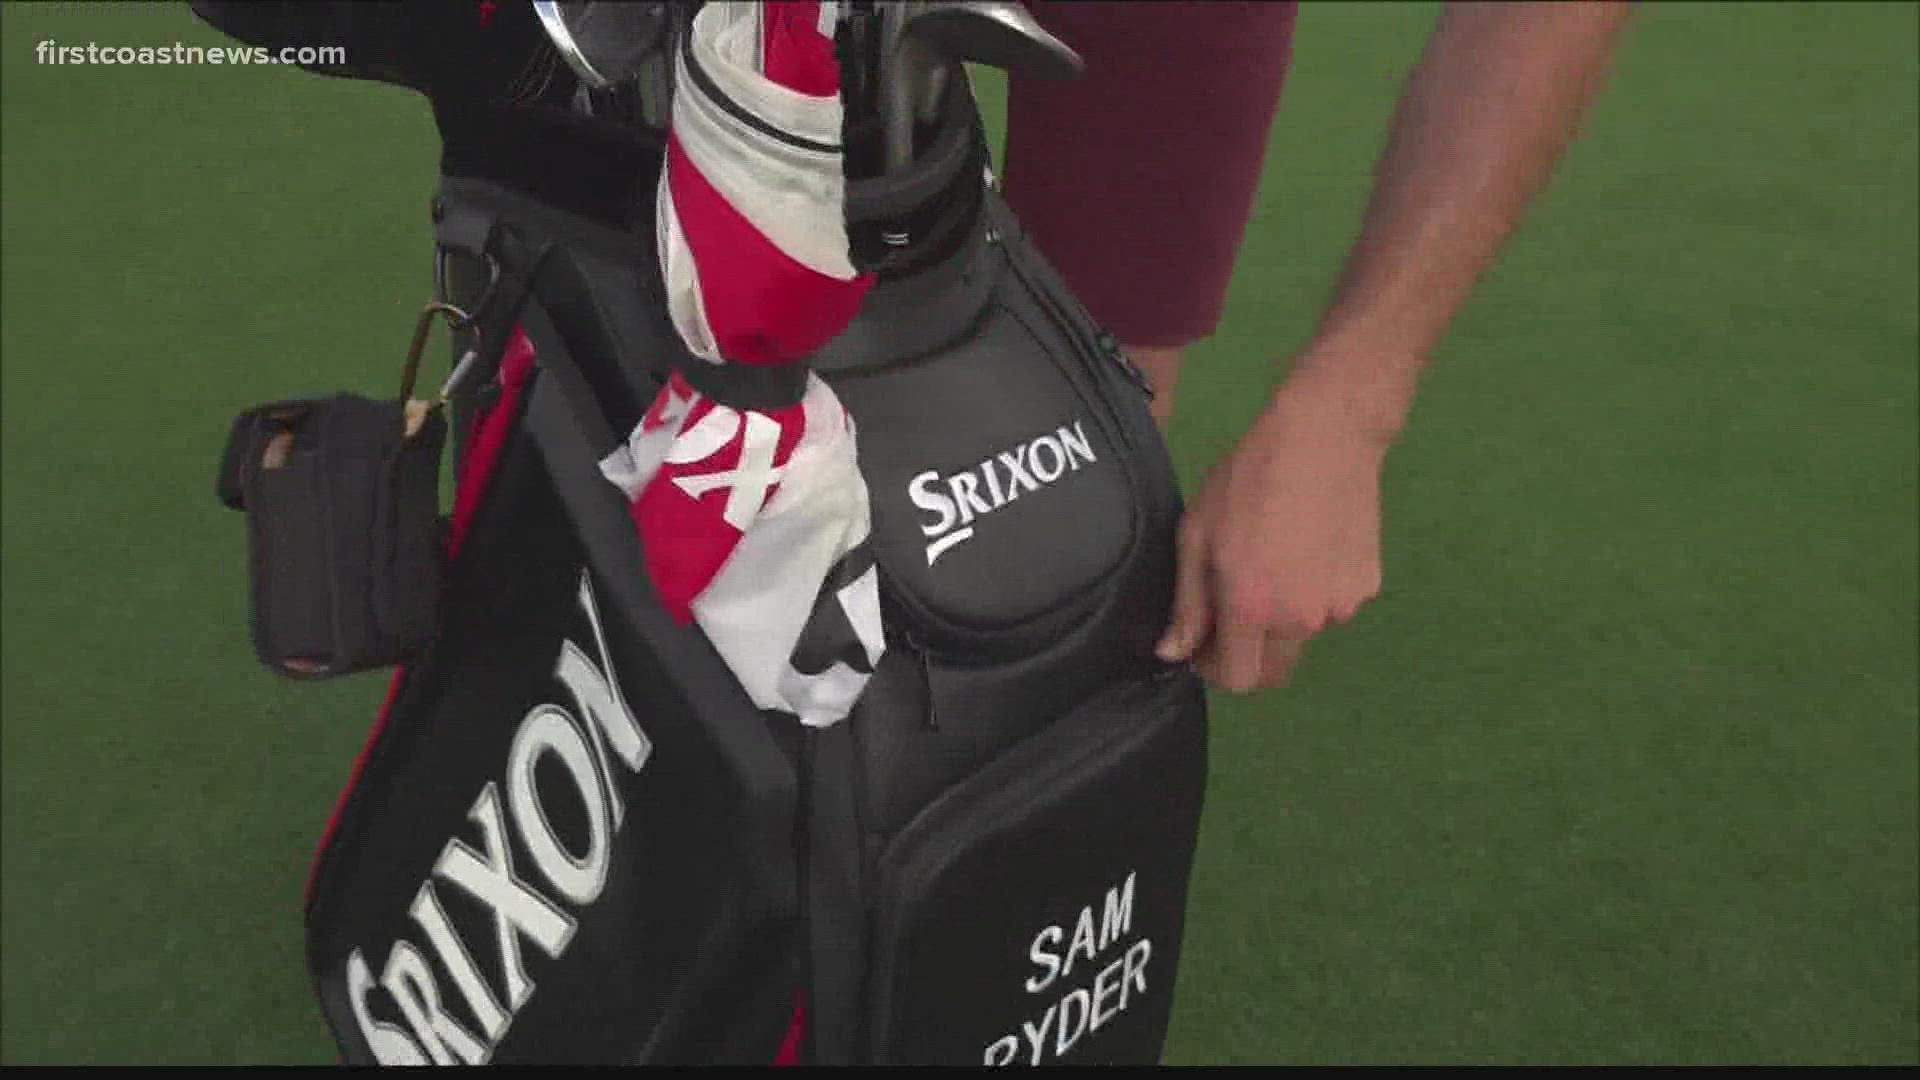 Ryder, a Stetson grad, gave First Coast Sports an exclusive look inside his bag ahead of THE PLAYERS Championship.